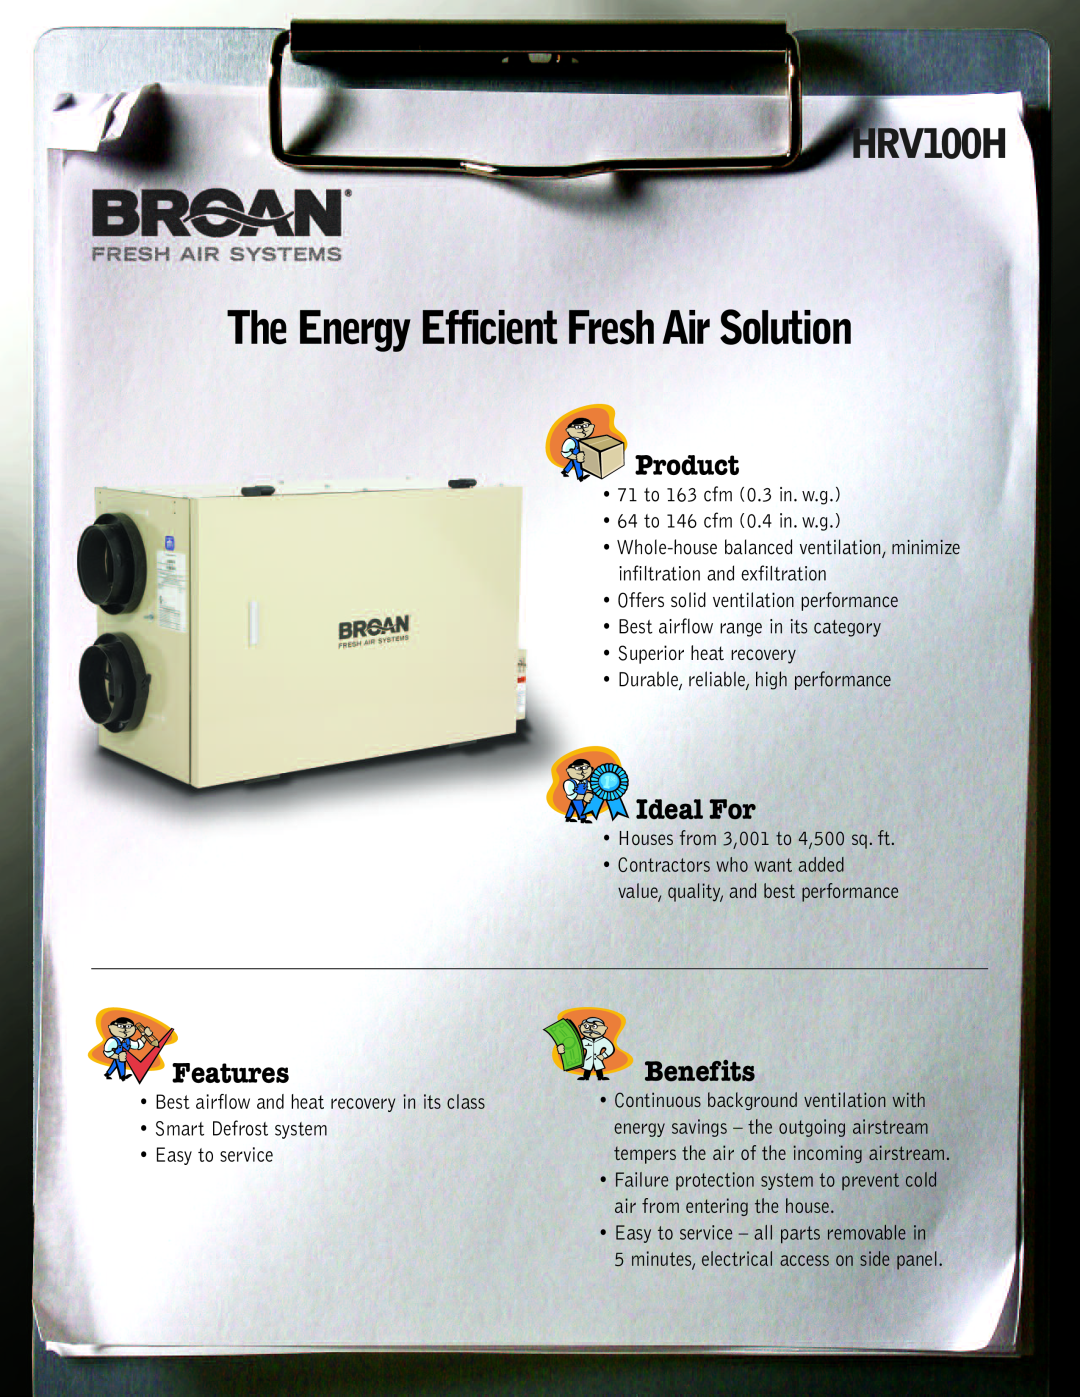 Broan HRV100H manual Product, Ideal For, Features, Benefits, The Energy Efficient Fresh Air Solution 